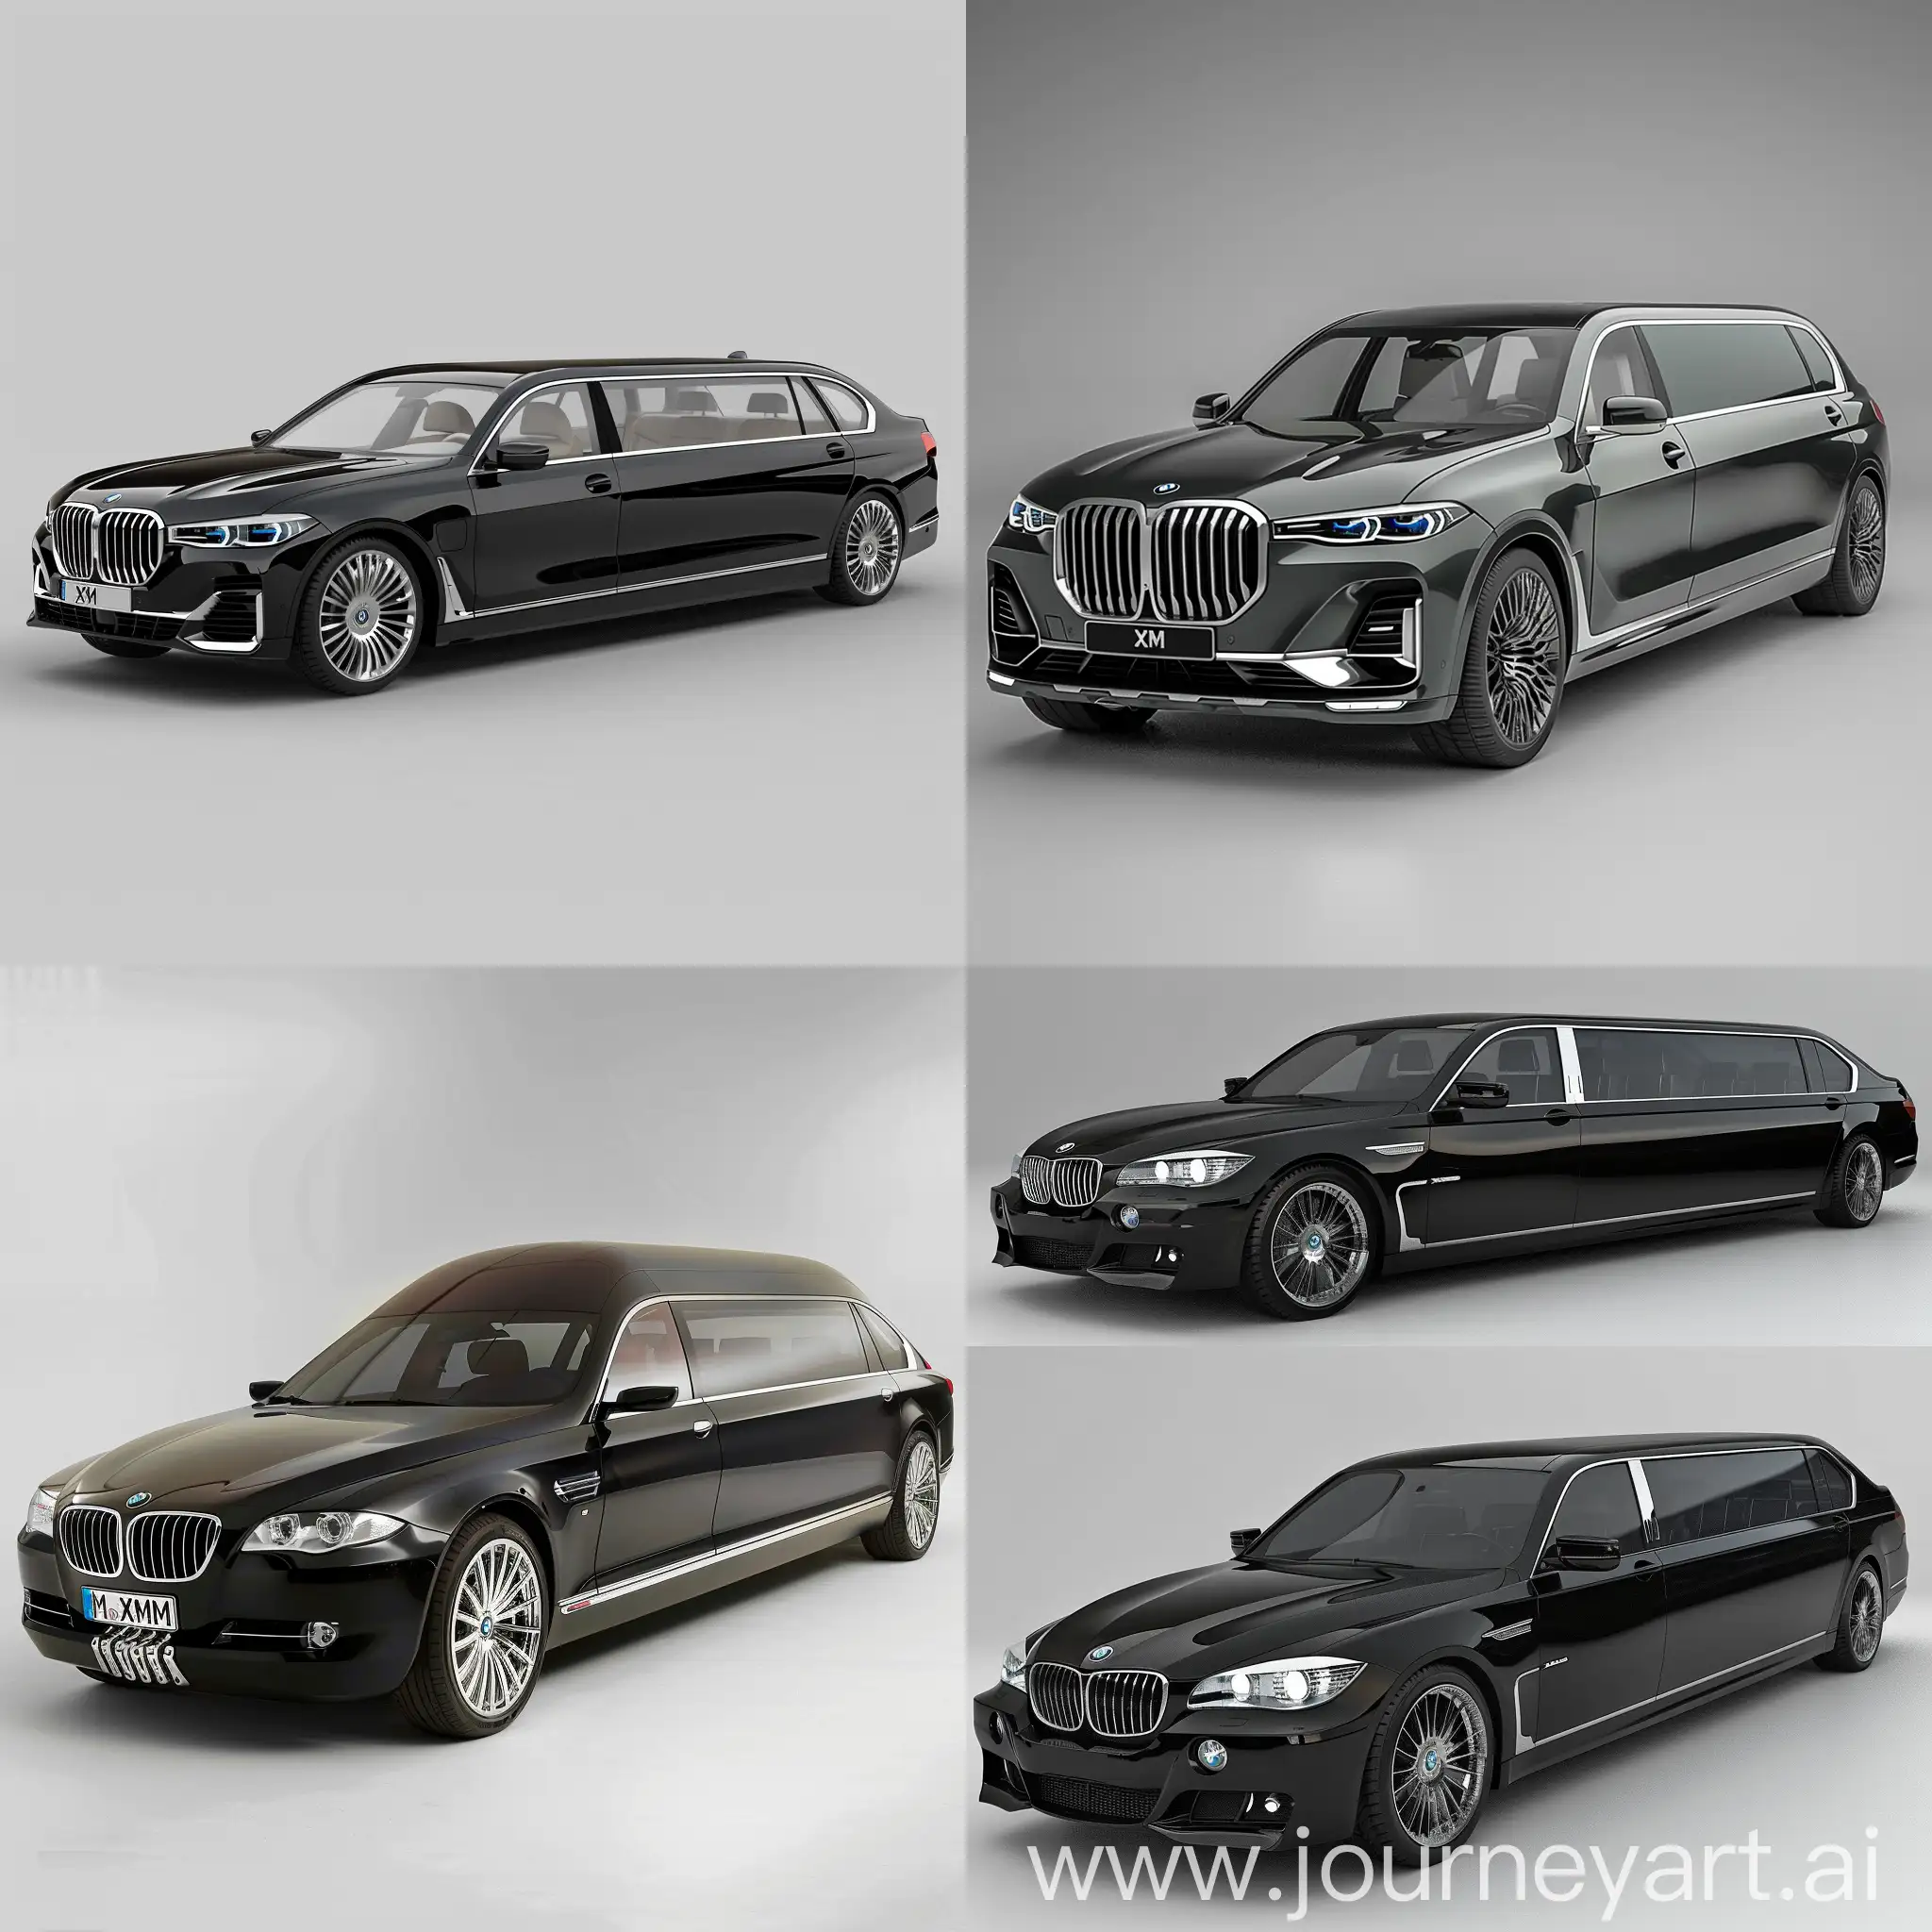 Luxury-BMW-XM-Limousine-Model-V6-11-Scale-with-AR-Feature-Exclusive-Edition